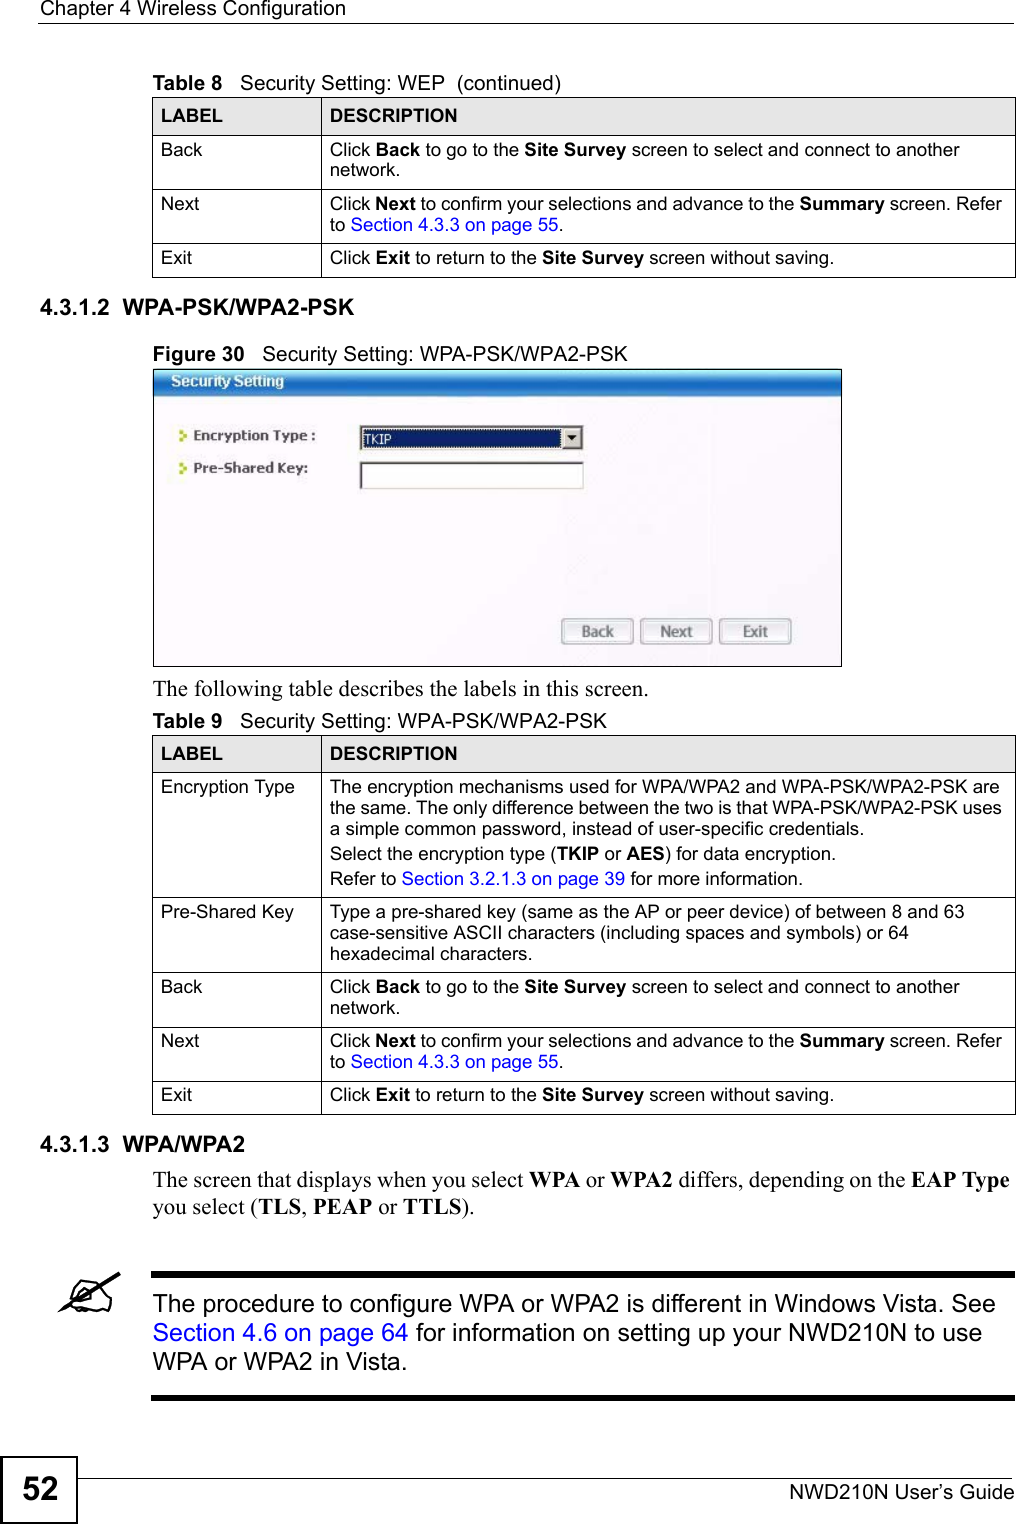 Chapter 4 Wireless ConfigurationNWD210N User’s Guide524.3.1.2  WPA-PSK/WPA2-PSKFigure 30   Security Setting: WPA-PSK/WPA2-PSKThe following table describes the labels in this screen. 4.3.1.3  WPA/WPA2The screen that displays when you select WPA or WPA2 differs, depending on the EAP Type you select (TLS, PEAP or TTLS).&quot;The procedure to configure WPA or WPA2 is different in Windows Vista. See Section 4.6 on page 64 for information on setting up your NWD210N to use WPA or WPA2 in Vista.Back Click Back to go to the Site Survey screen to select and connect to another network.Next Click Next to confirm your selections and advance to the Summary screen. Refer to Section 4.3.3 on page 55. Exit Click Exit to return to the Site Survey screen without saving.Table 8   Security Setting: WEP  (continued)LABEL DESCRIPTIONTable 9   Security Setting: WPA-PSK/WPA2-PSKLABEL DESCRIPTIONEncryption Type The encryption mechanisms used for WPA/WPA2 and WPA-PSK/WPA2-PSK are the same. The only difference between the two is that WPA-PSK/WPA2-PSK uses a simple common password, instead of user-specific credentials.Select the encryption type (TKIP or AES) for data encryption.Refer to Section 3.2.1.3 on page 39 for more information.Pre-Shared Key Type a pre-shared key (same as the AP or peer device) of between 8 and 63 case-sensitive ASCII characters (including spaces and symbols) or 64 hexadecimal characters.Back Click Back to go to the Site Survey screen to select and connect to another network.Next Click Next to confirm your selections and advance to the Summary screen. Refer to Section 4.3.3 on page 55. Exit Click Exit to return to the Site Survey screen without saving.